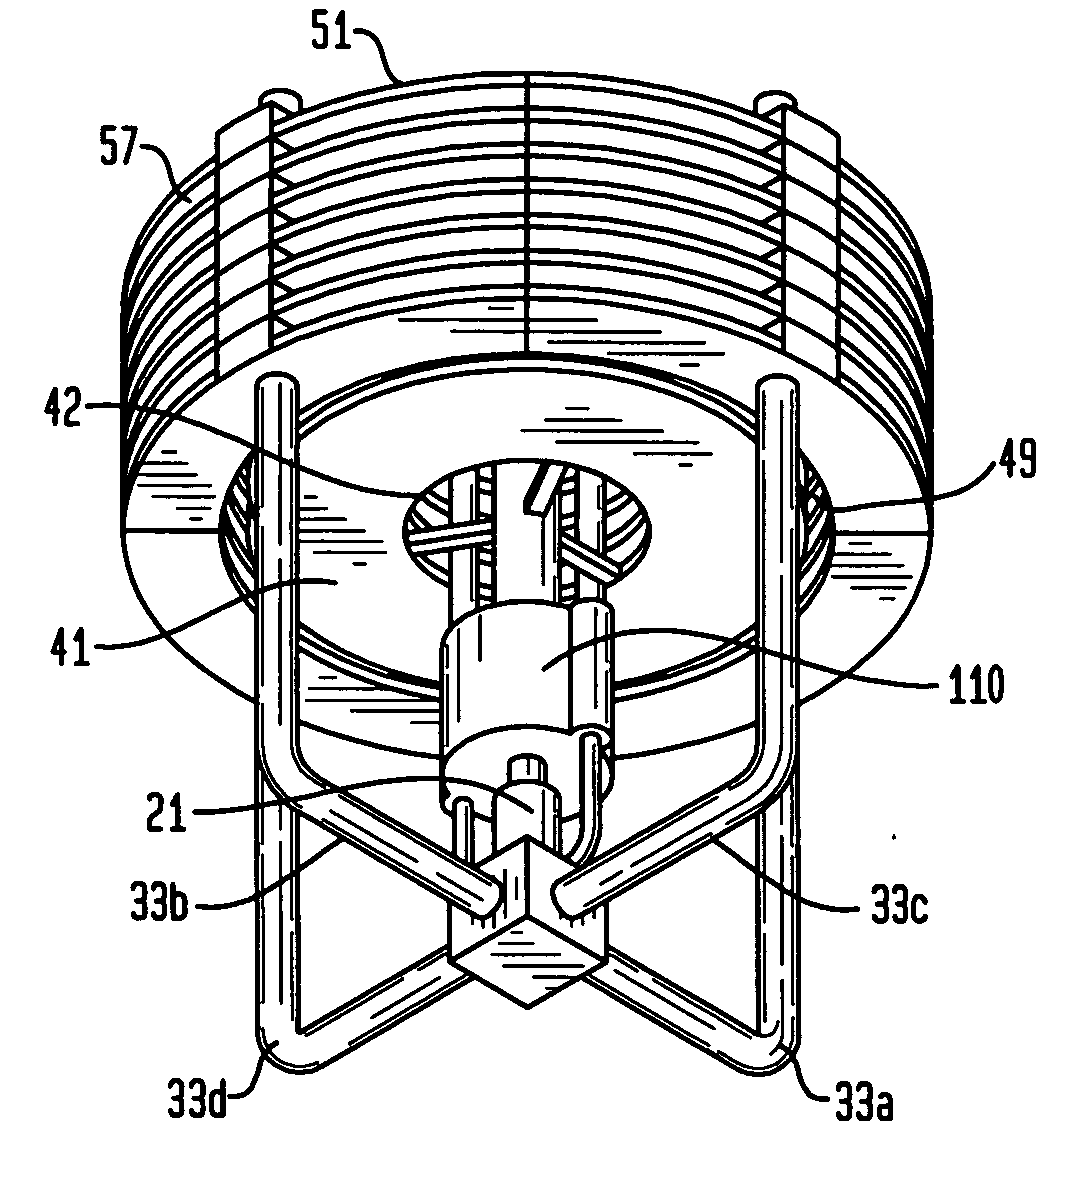 Cooling apparatus for heat generating devices